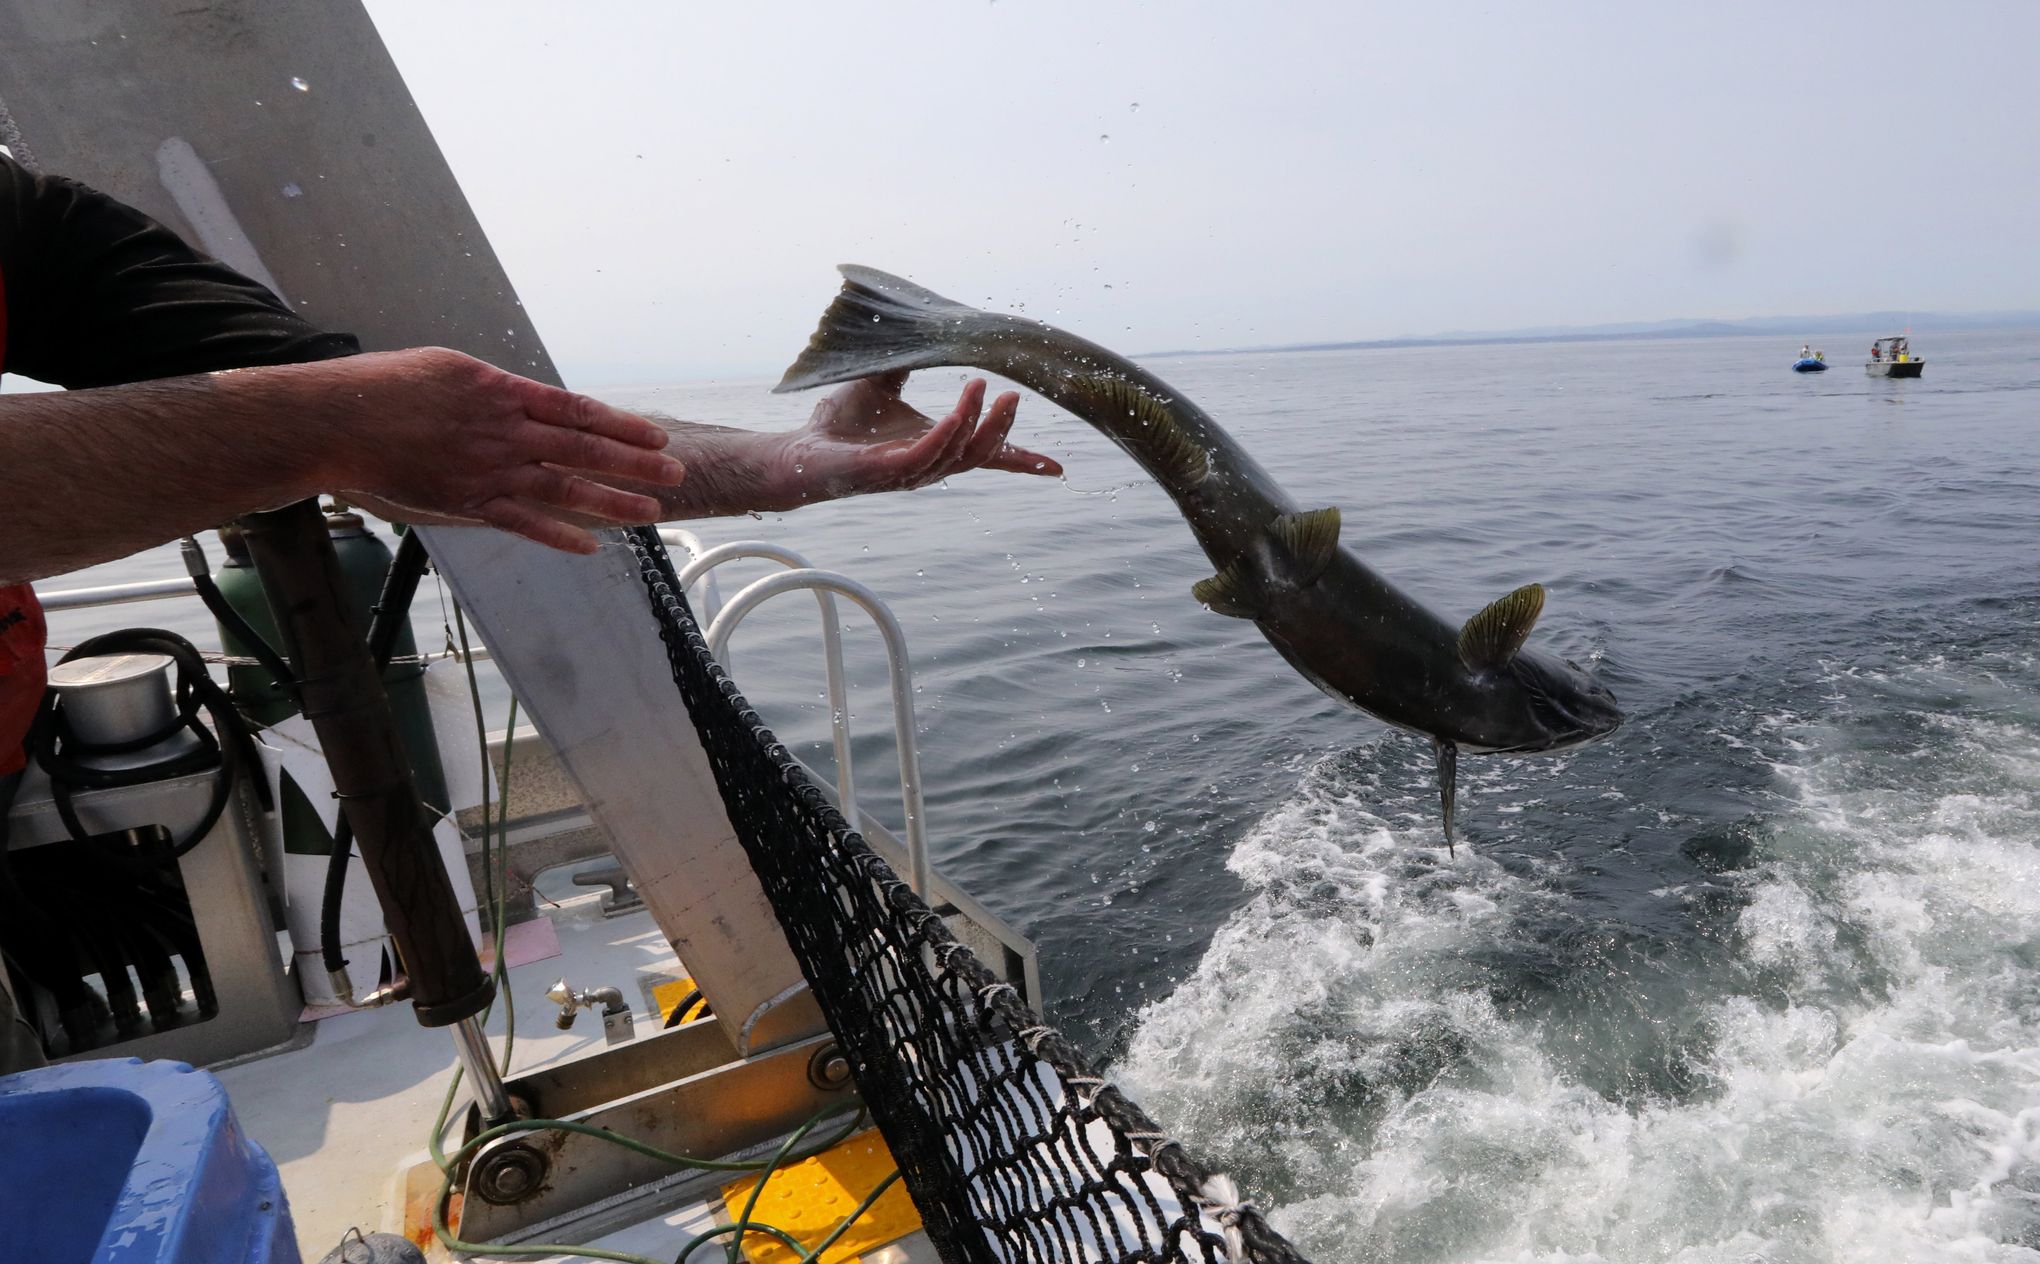 Dosed salmon, clipped fins, a 'dinner bell': How far is too far in